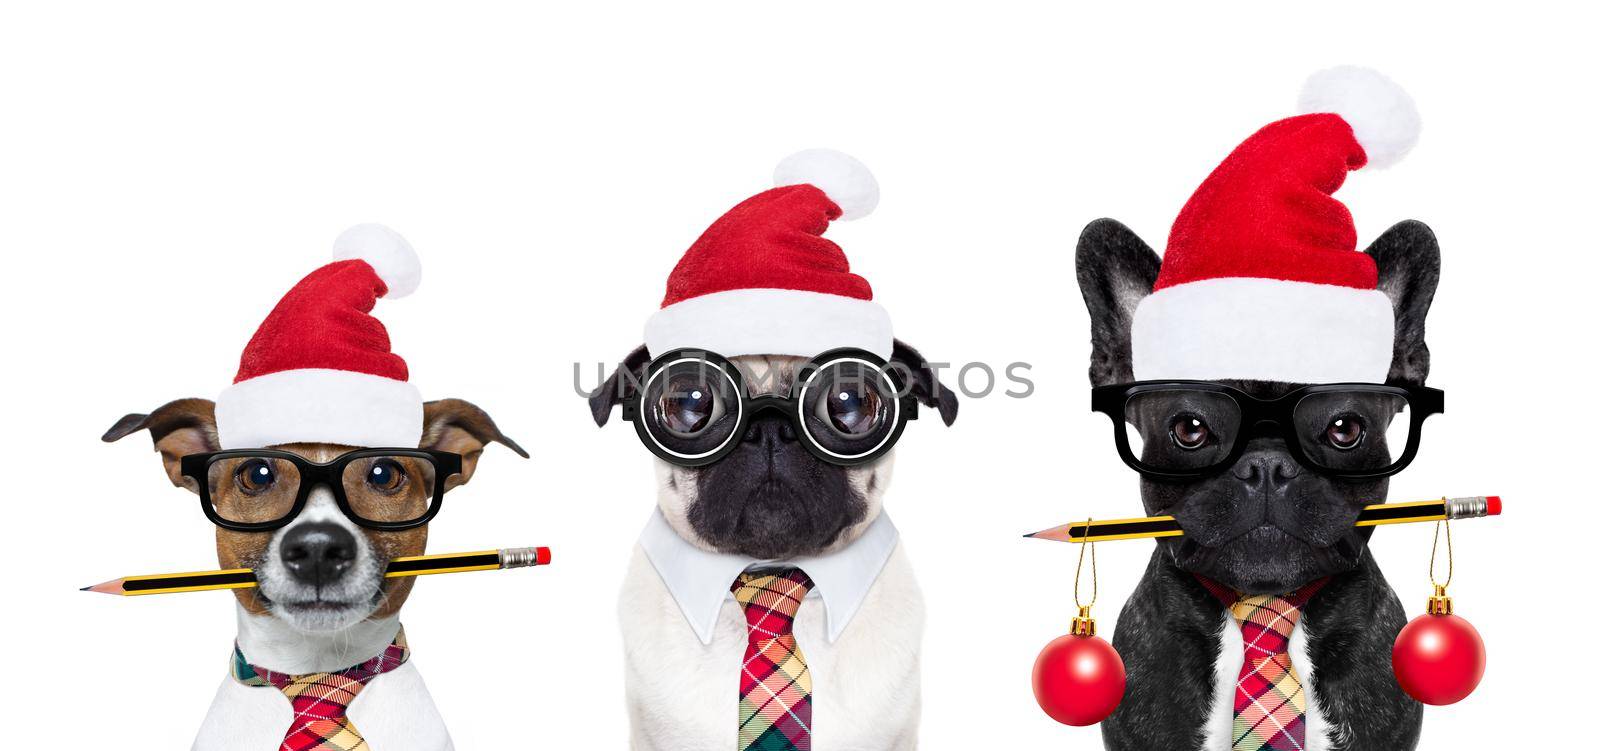 dog office workers on christmas holidays by Brosch